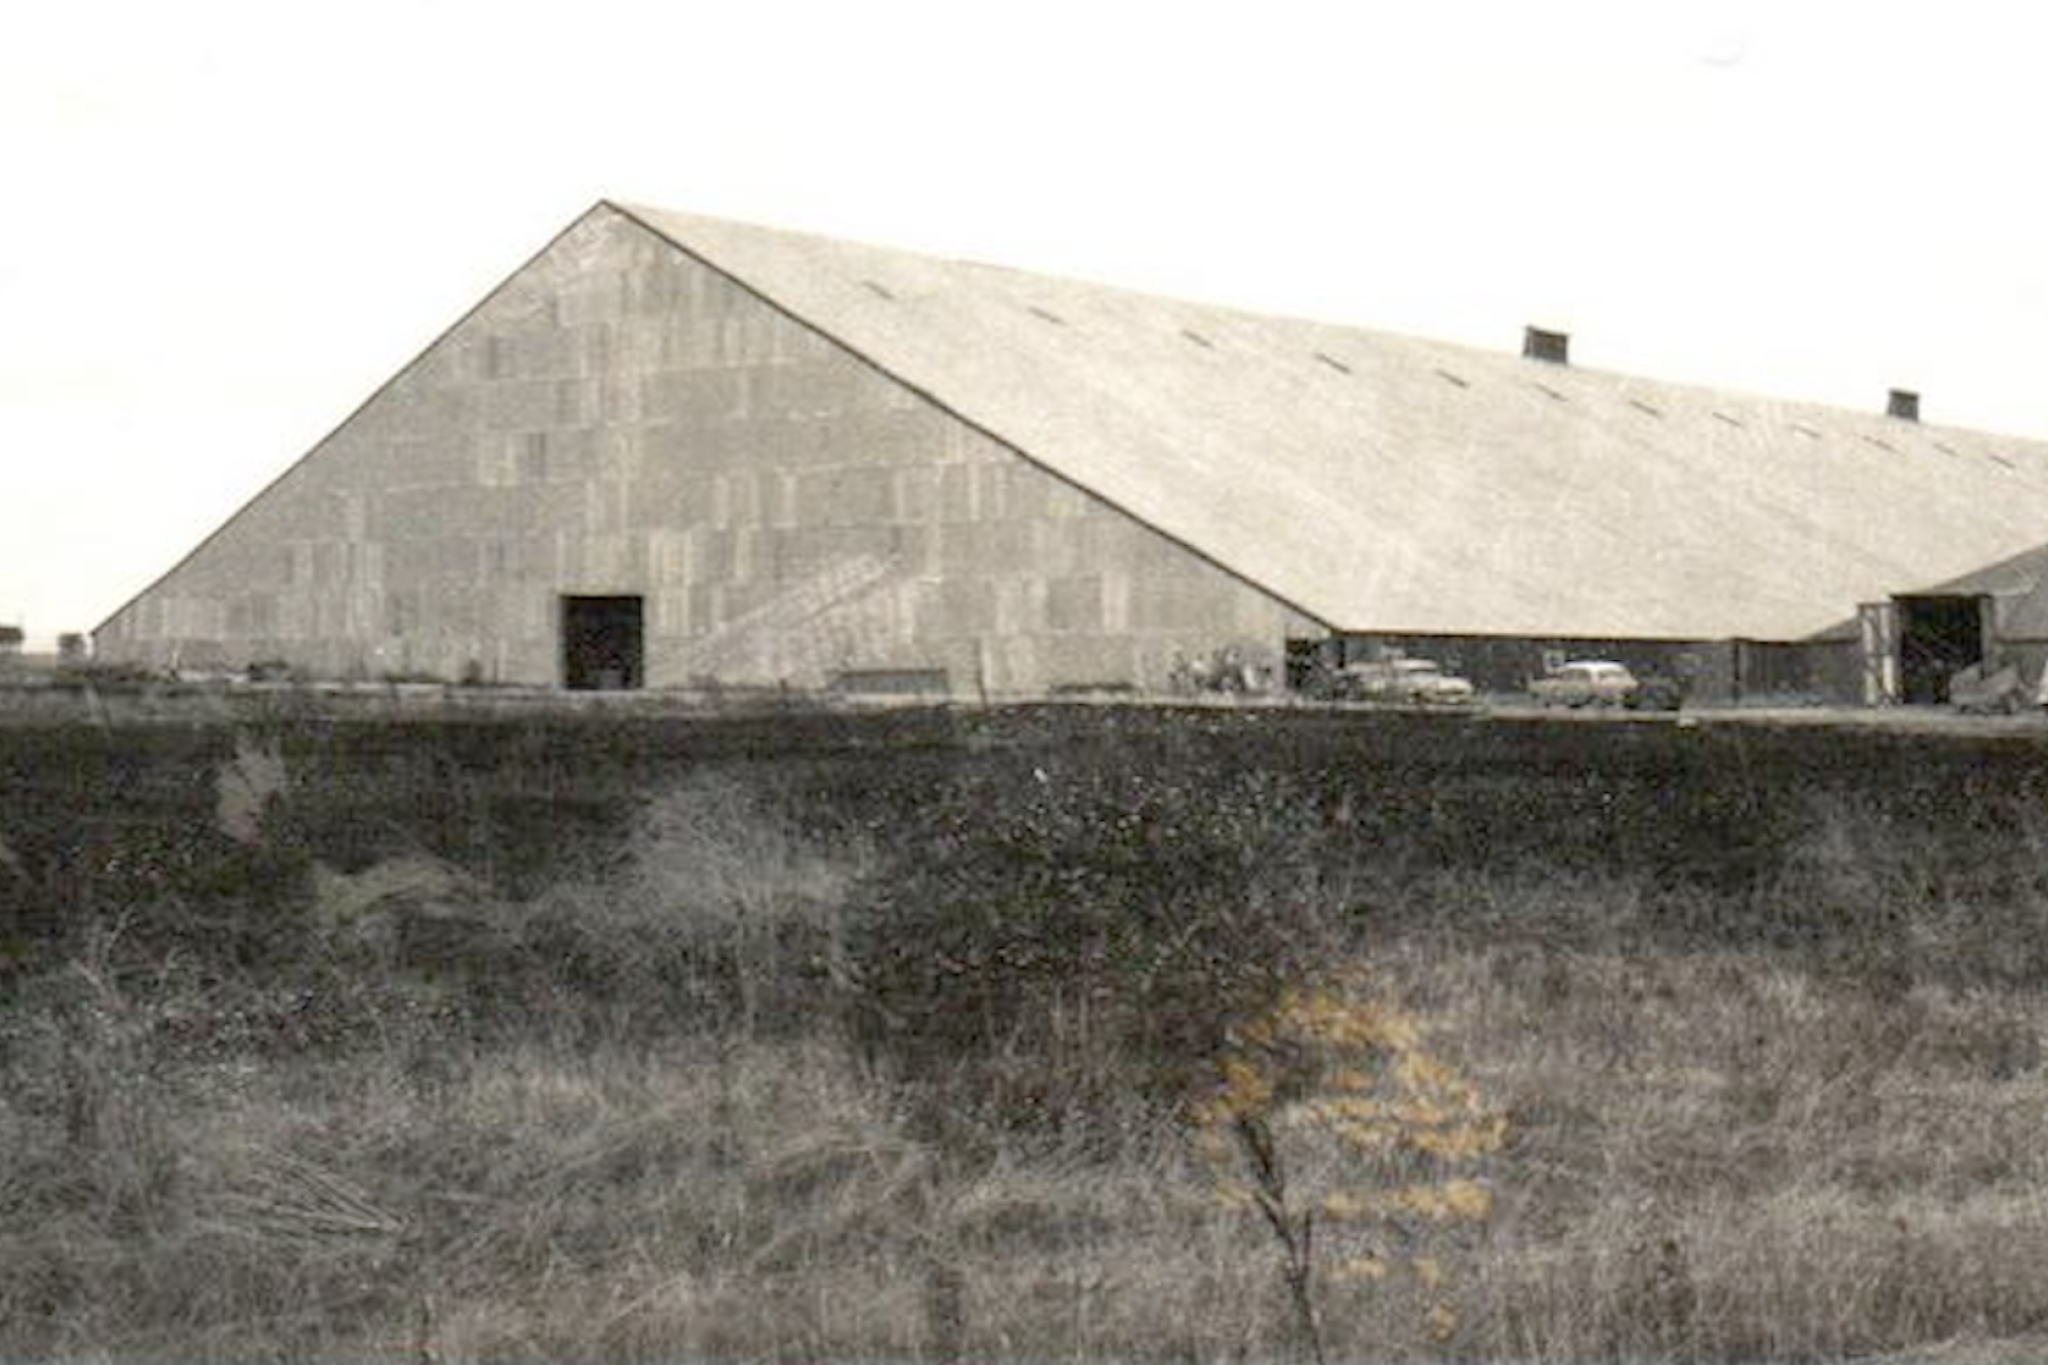 The eastern end of the second, larger, and now demolished shed, circa late 1960’s